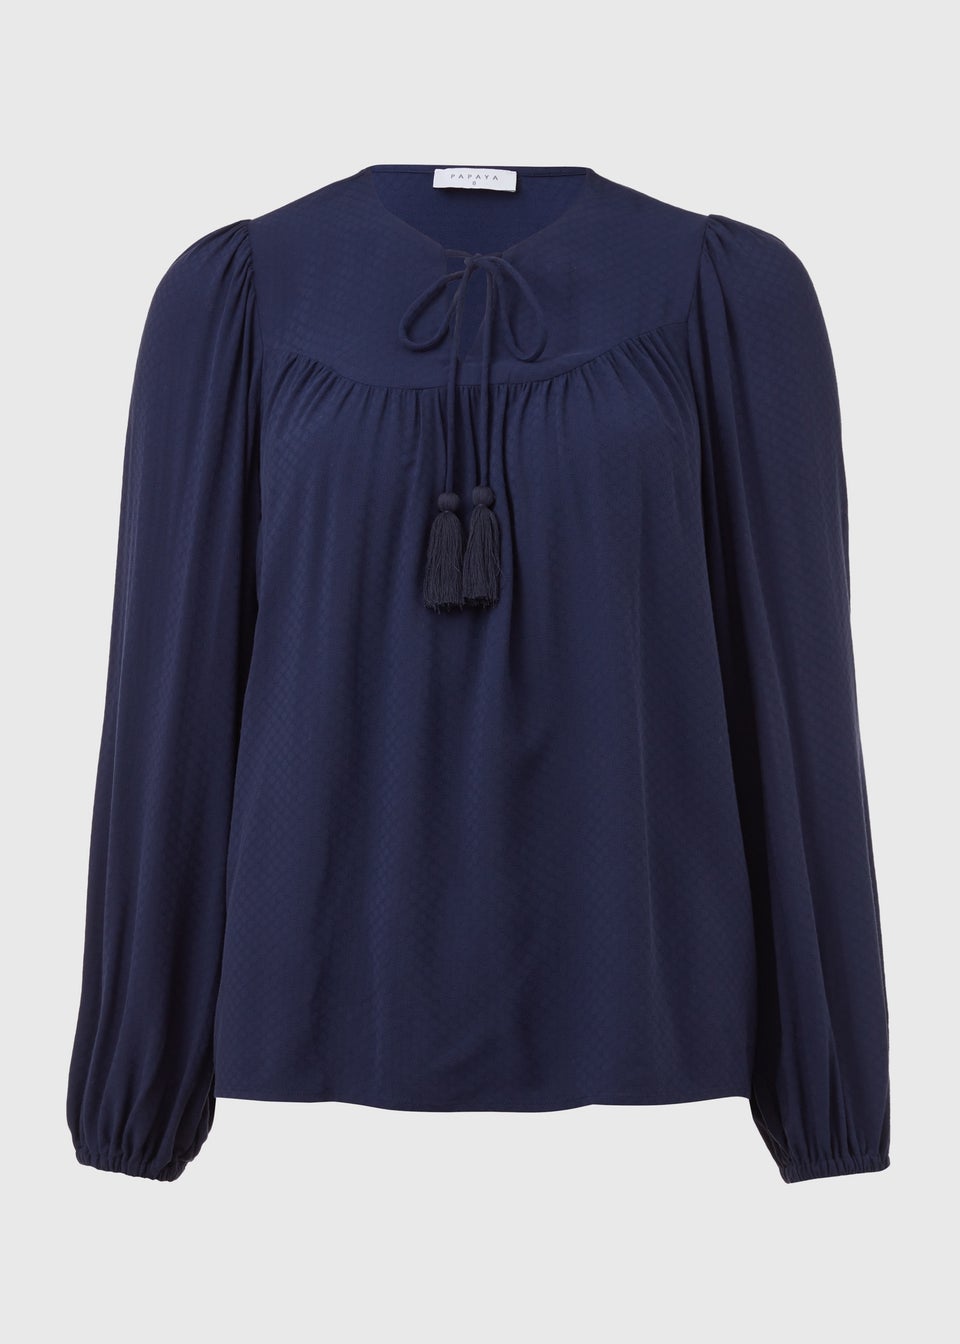 Navy Blue Boho Blouse With Tassels